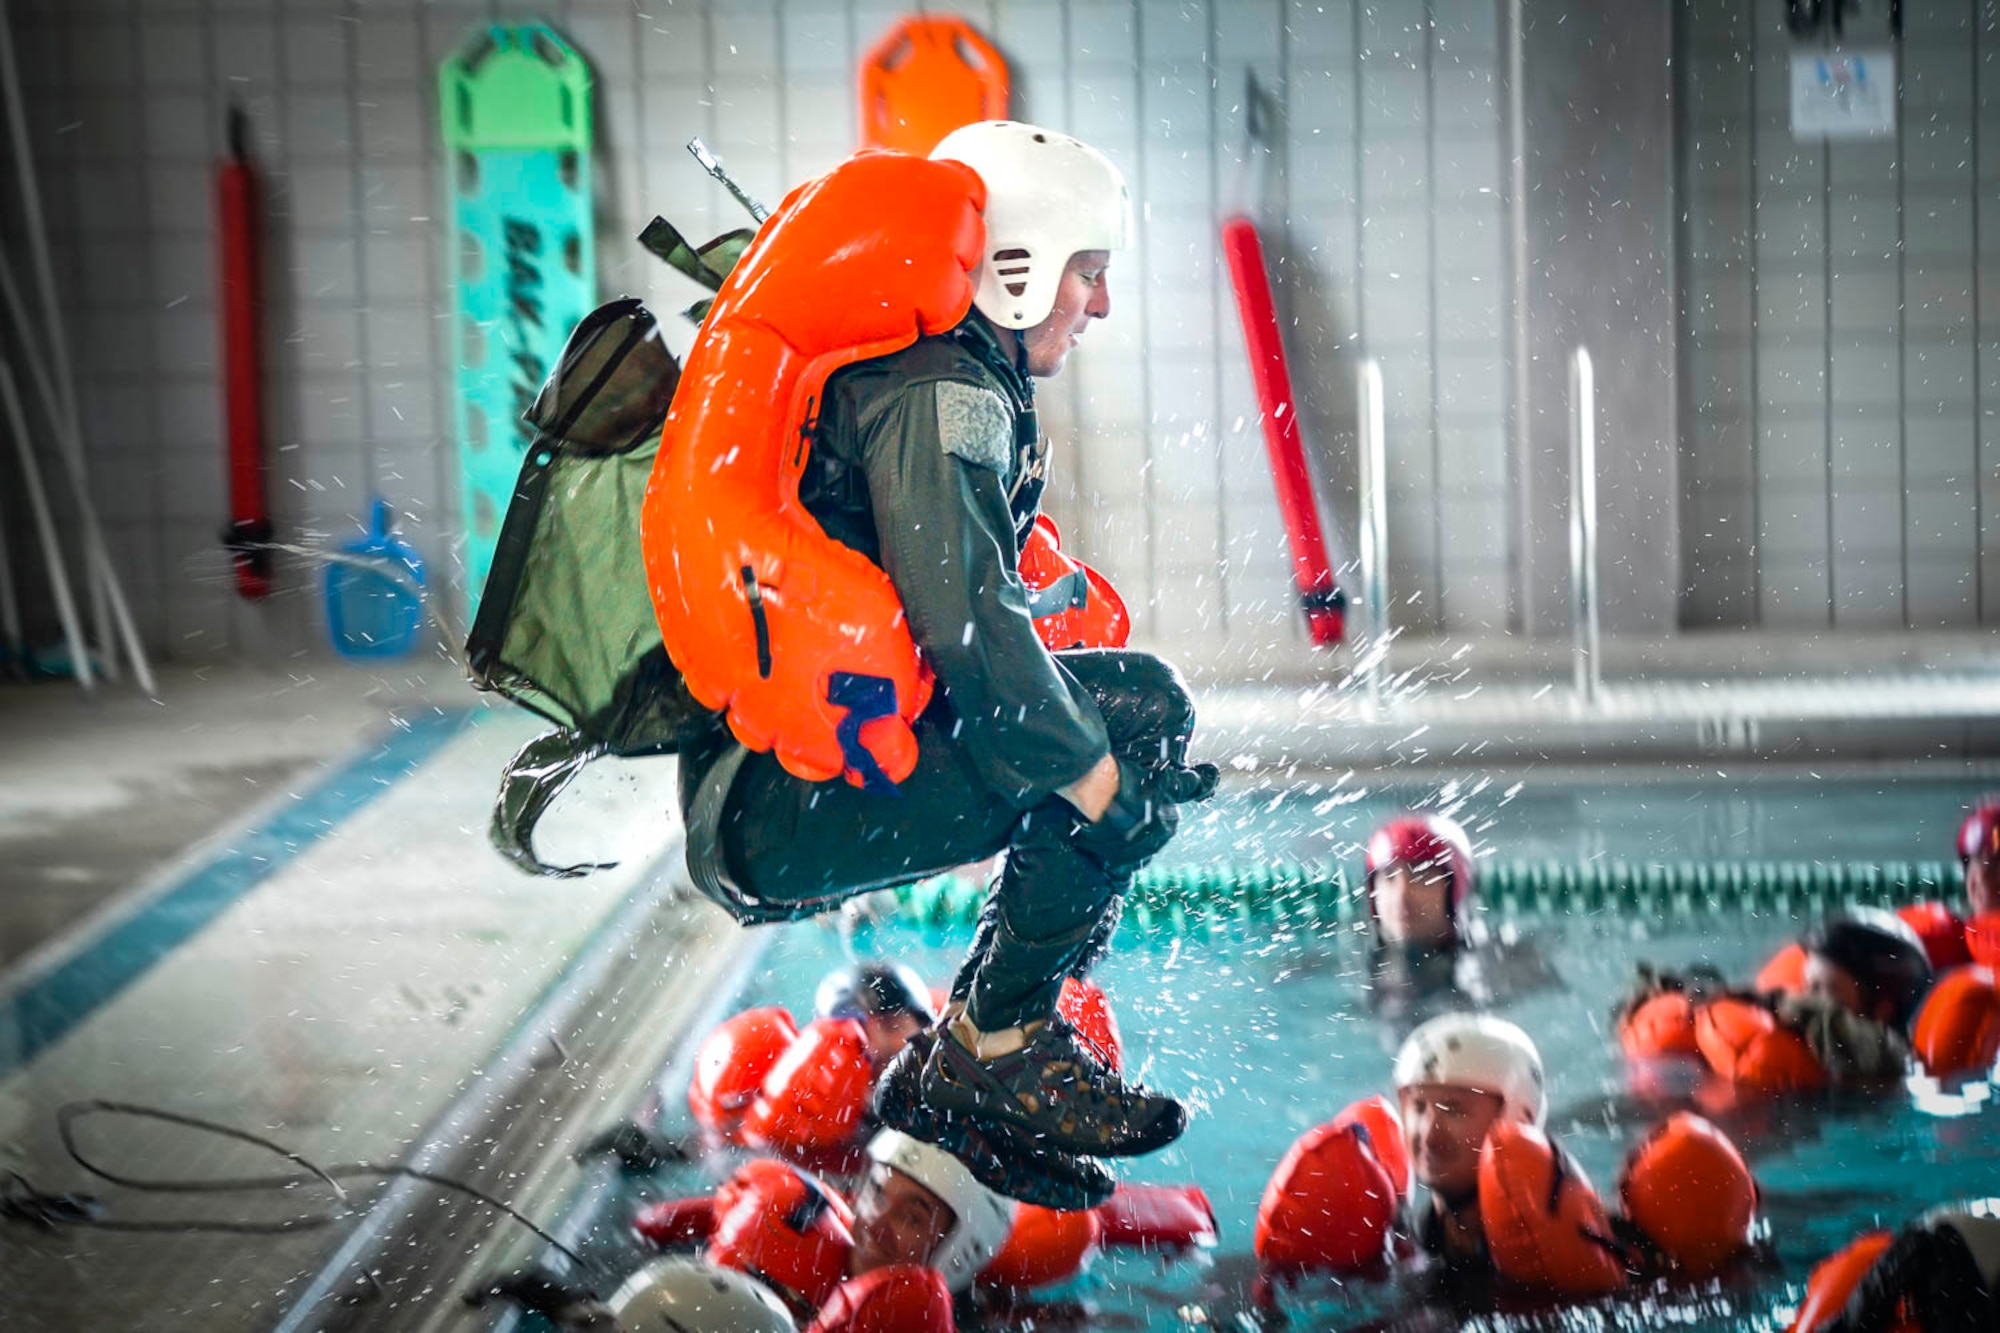 Team Little Rock aircrew members participated in Water Survival training taught by Survival, Evasion, Resistance and Escape instructors April 6, 2019, at the Jacksonville Community Center, Jacksonville, Arkansas